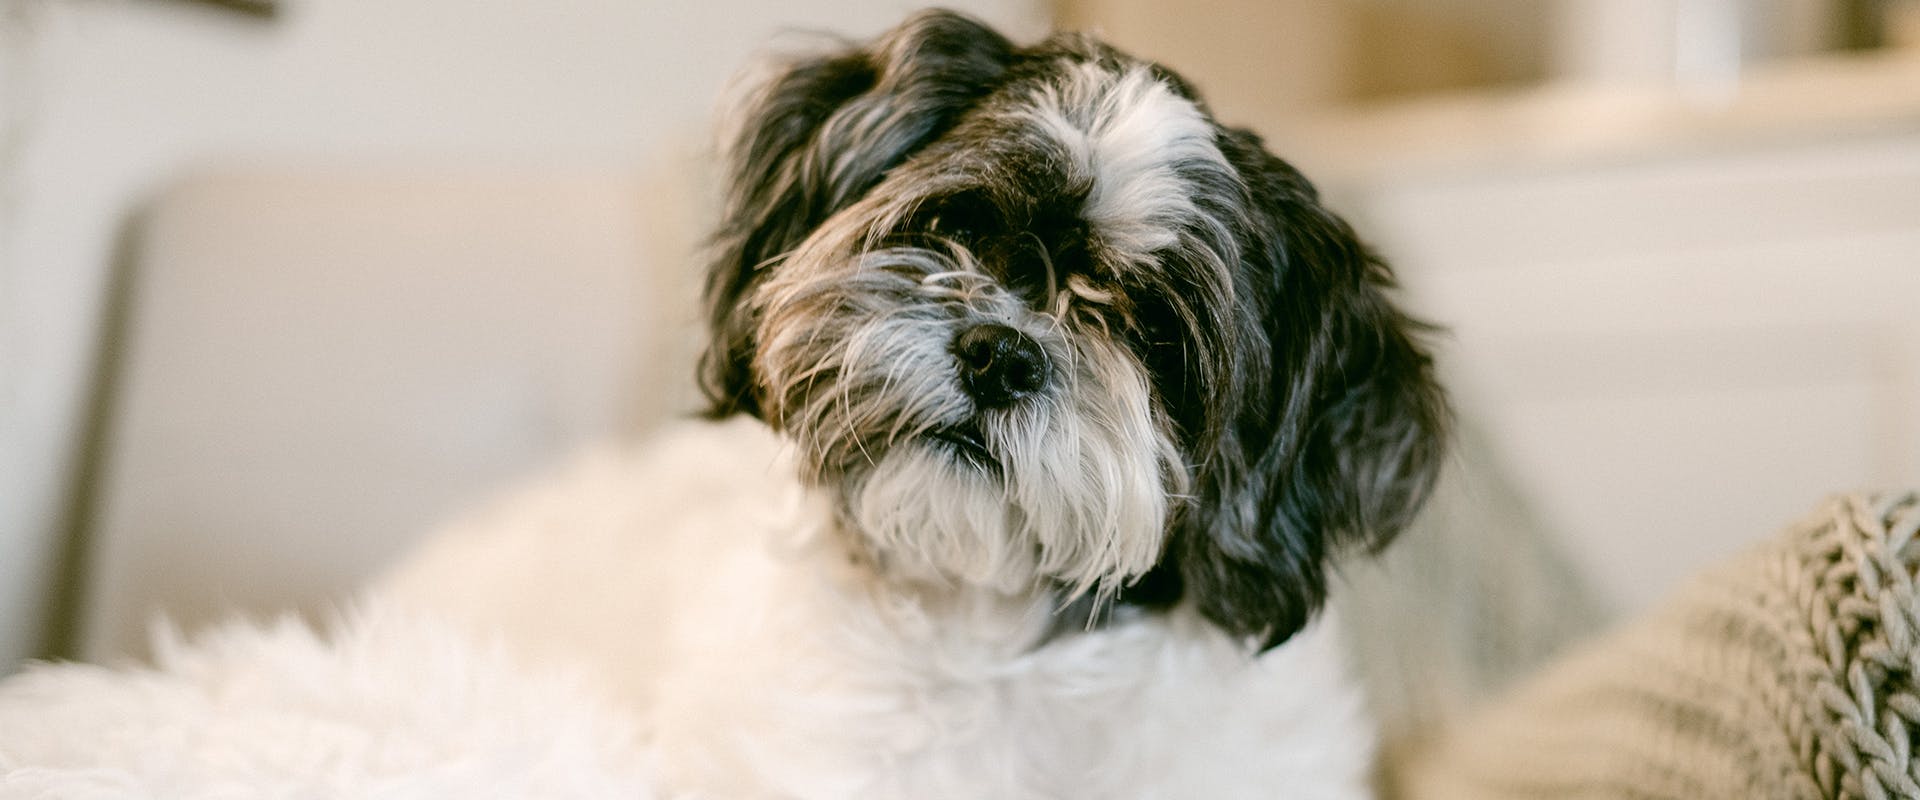 A black and white Shih Tzu dog, its head tilted to the right